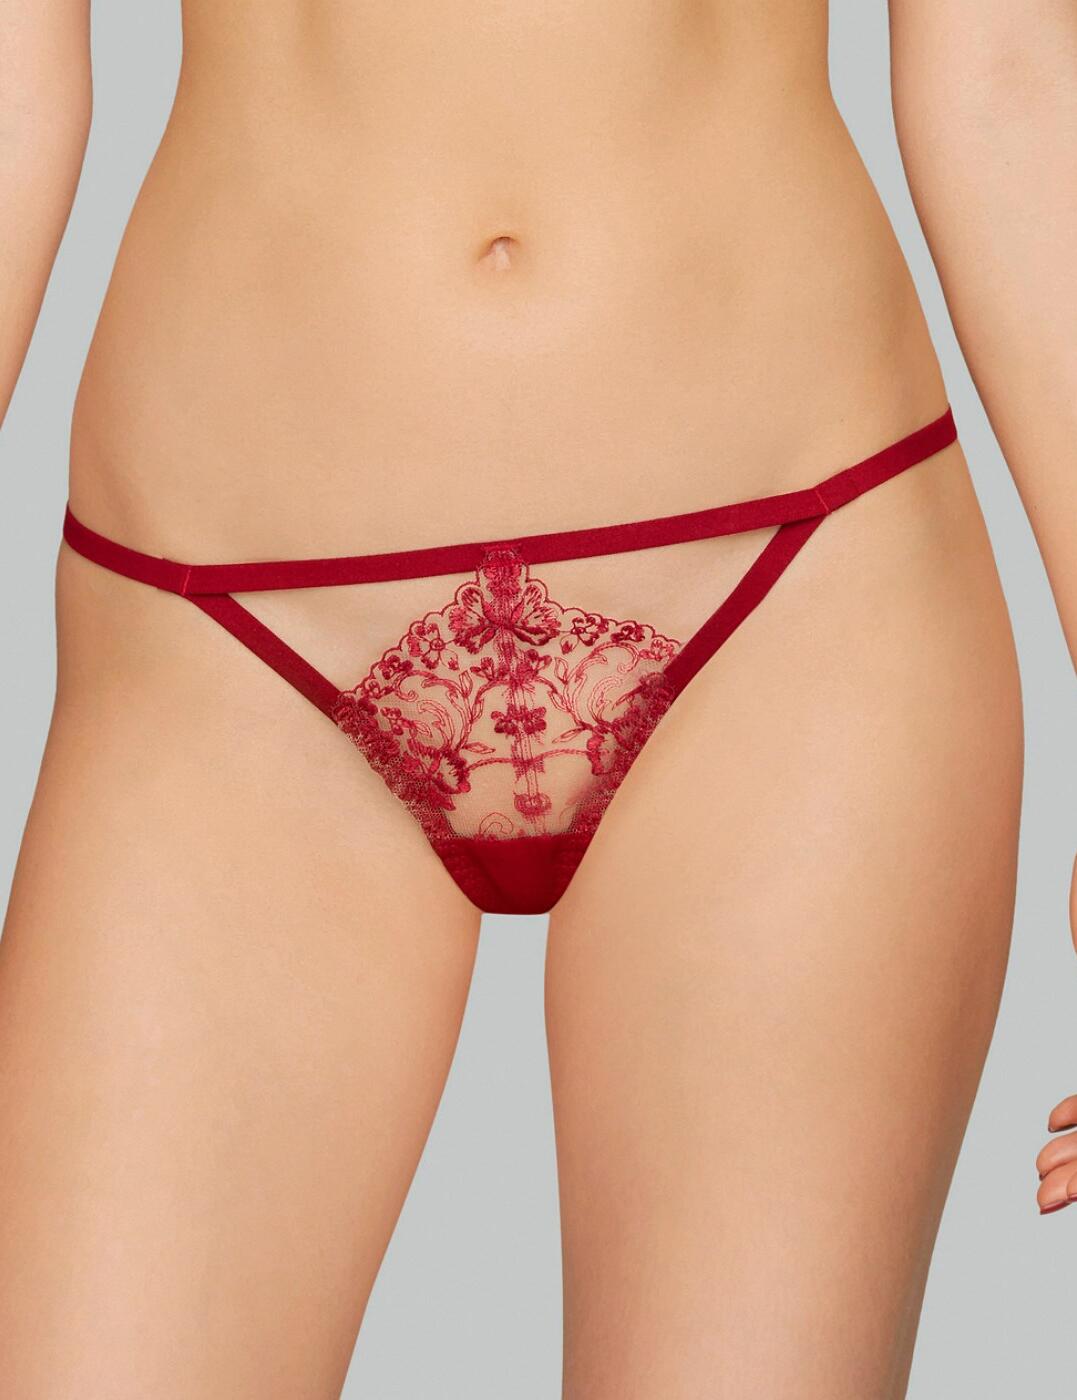 ELY-015-07 Coco de Mer Reign Elysee Thong - ELY-015-07 Cherry Red